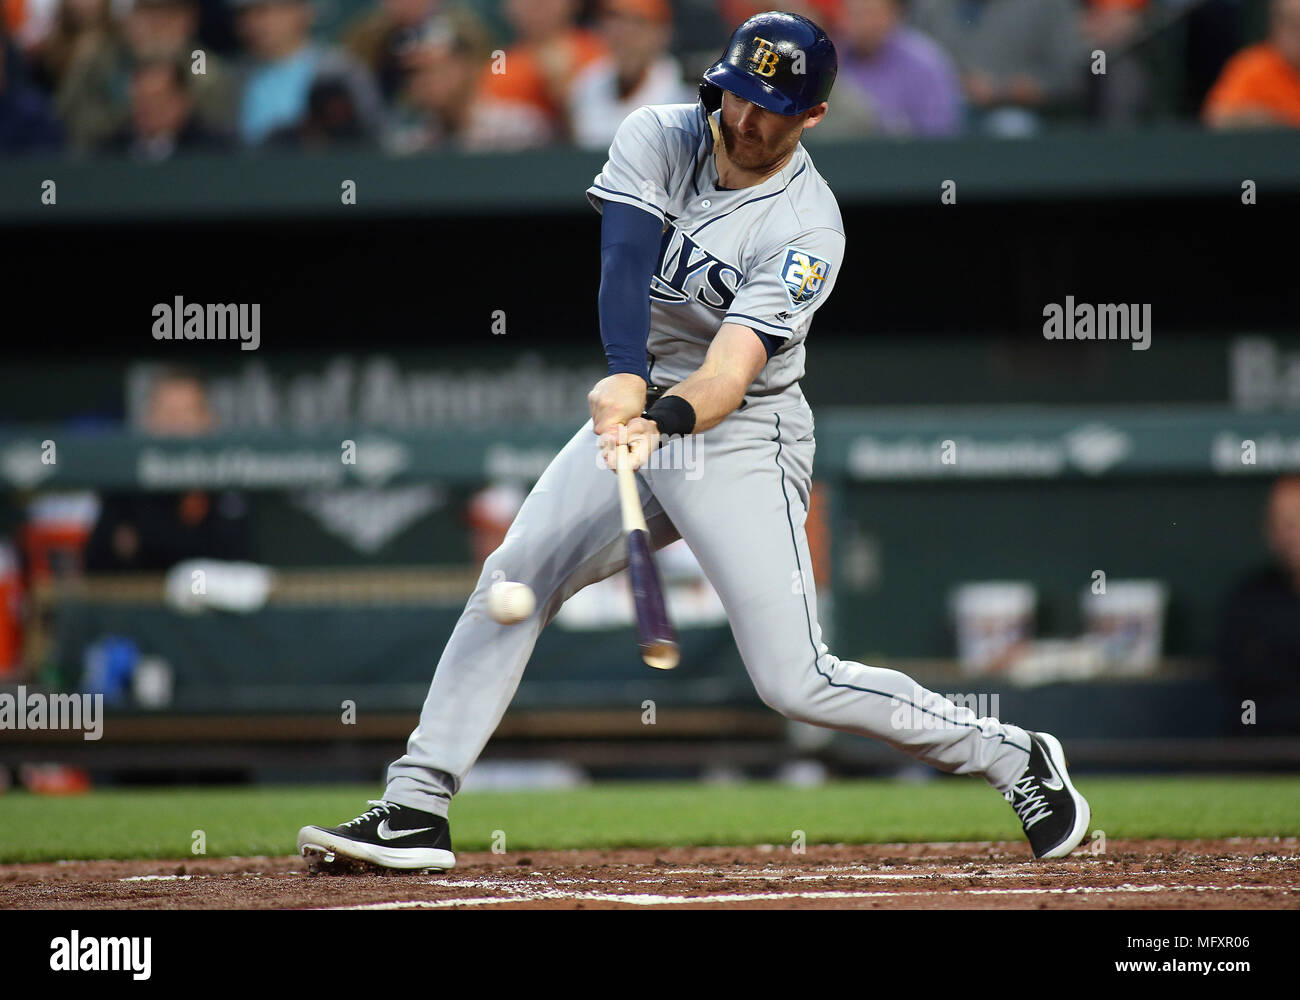 Baltimore, Maryland, USA. 26th Apr, 2018. Tampa Bay Rays first baseman C.J.  Cron (44) rounds the bases after he hit a homerun during a match between  the Baltimore Orioles and the Tampa